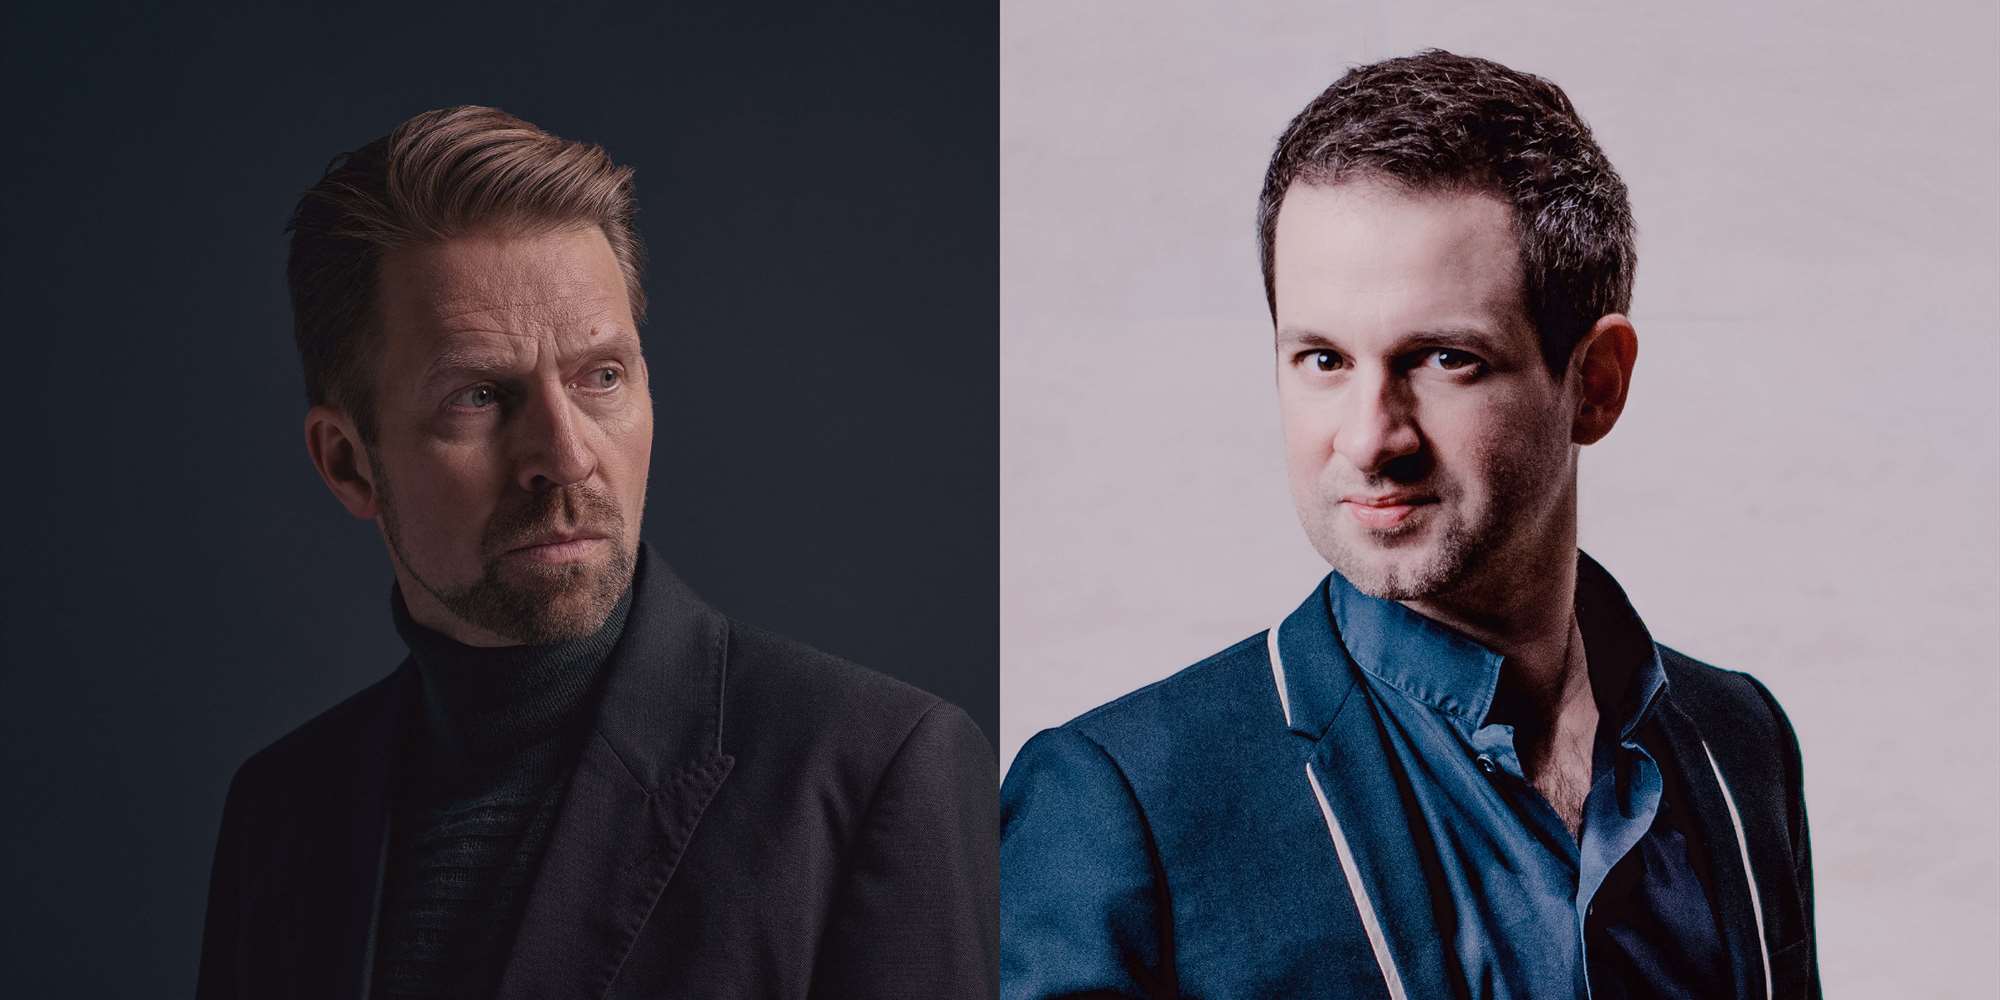 Leif Ove Andsnes & Bertrand Chamayou